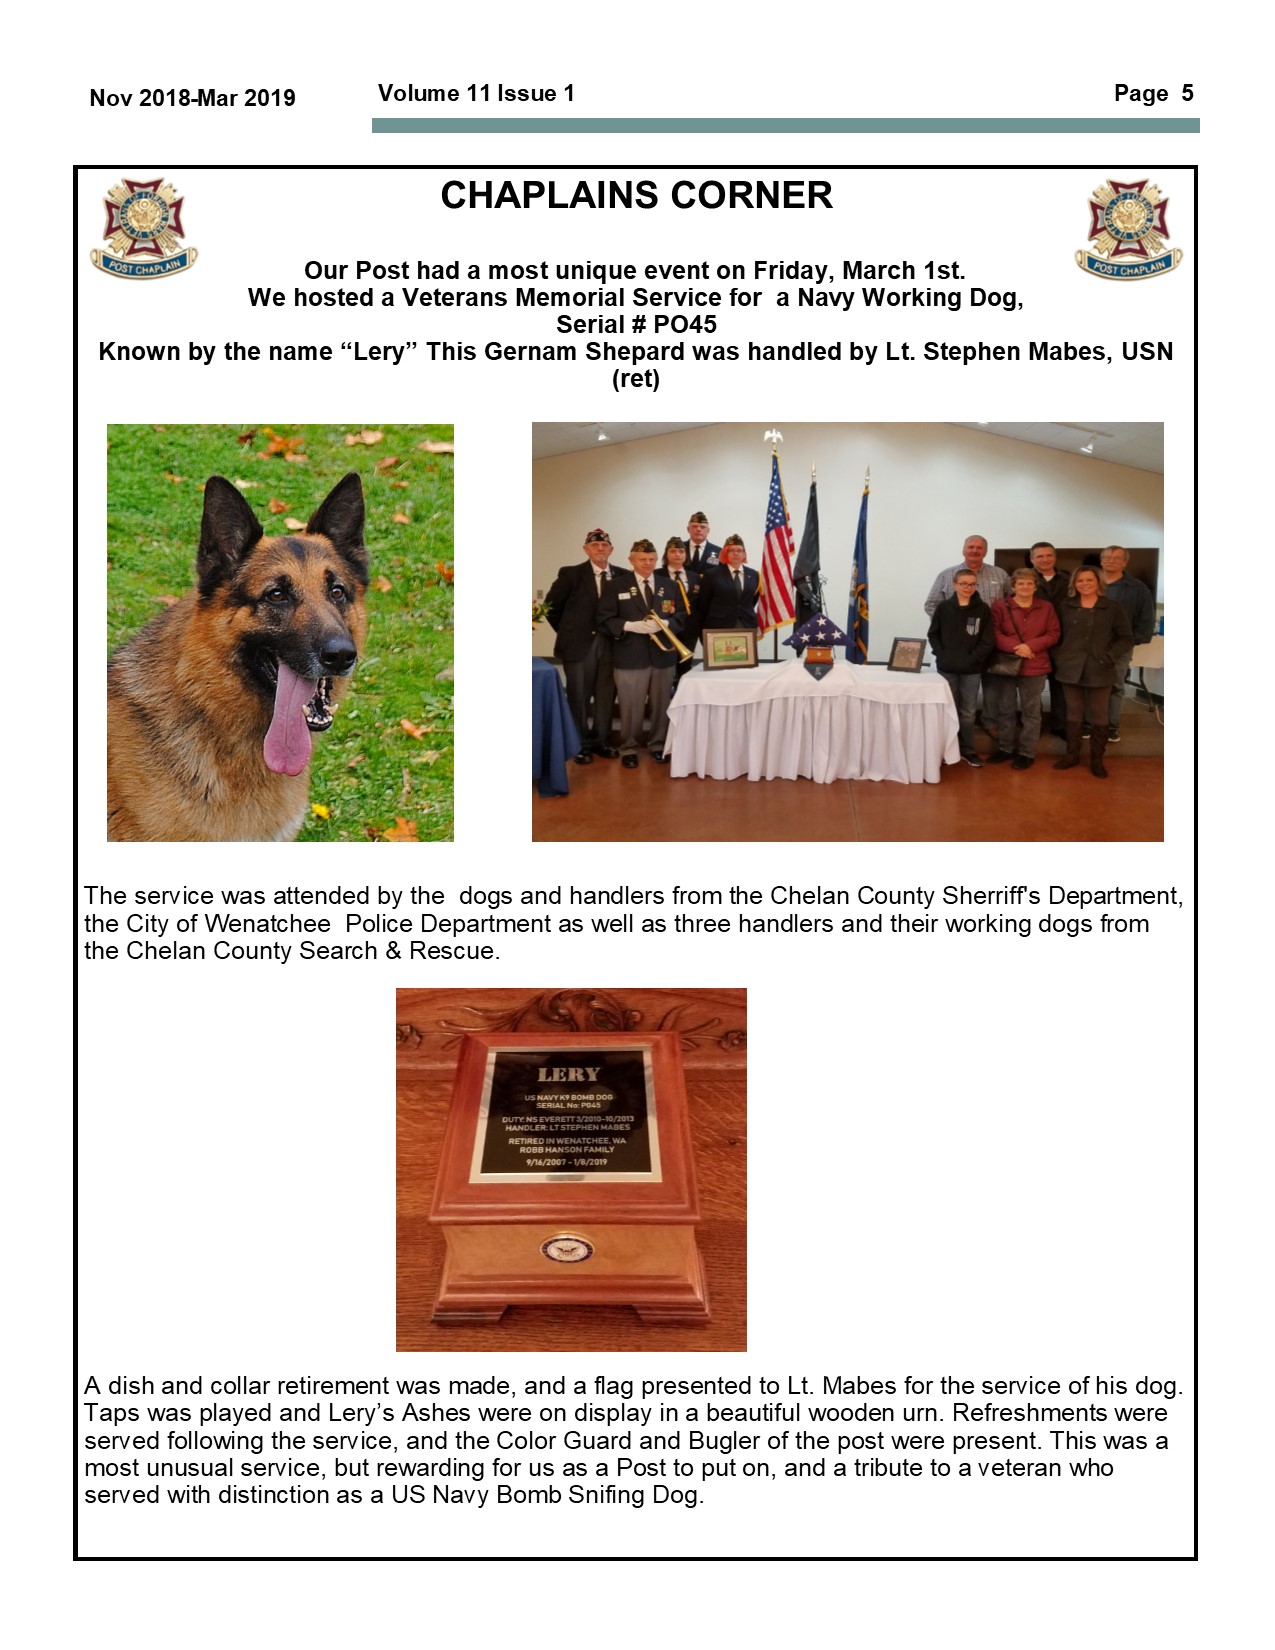 photos and story of memorial for USN K9 Lery